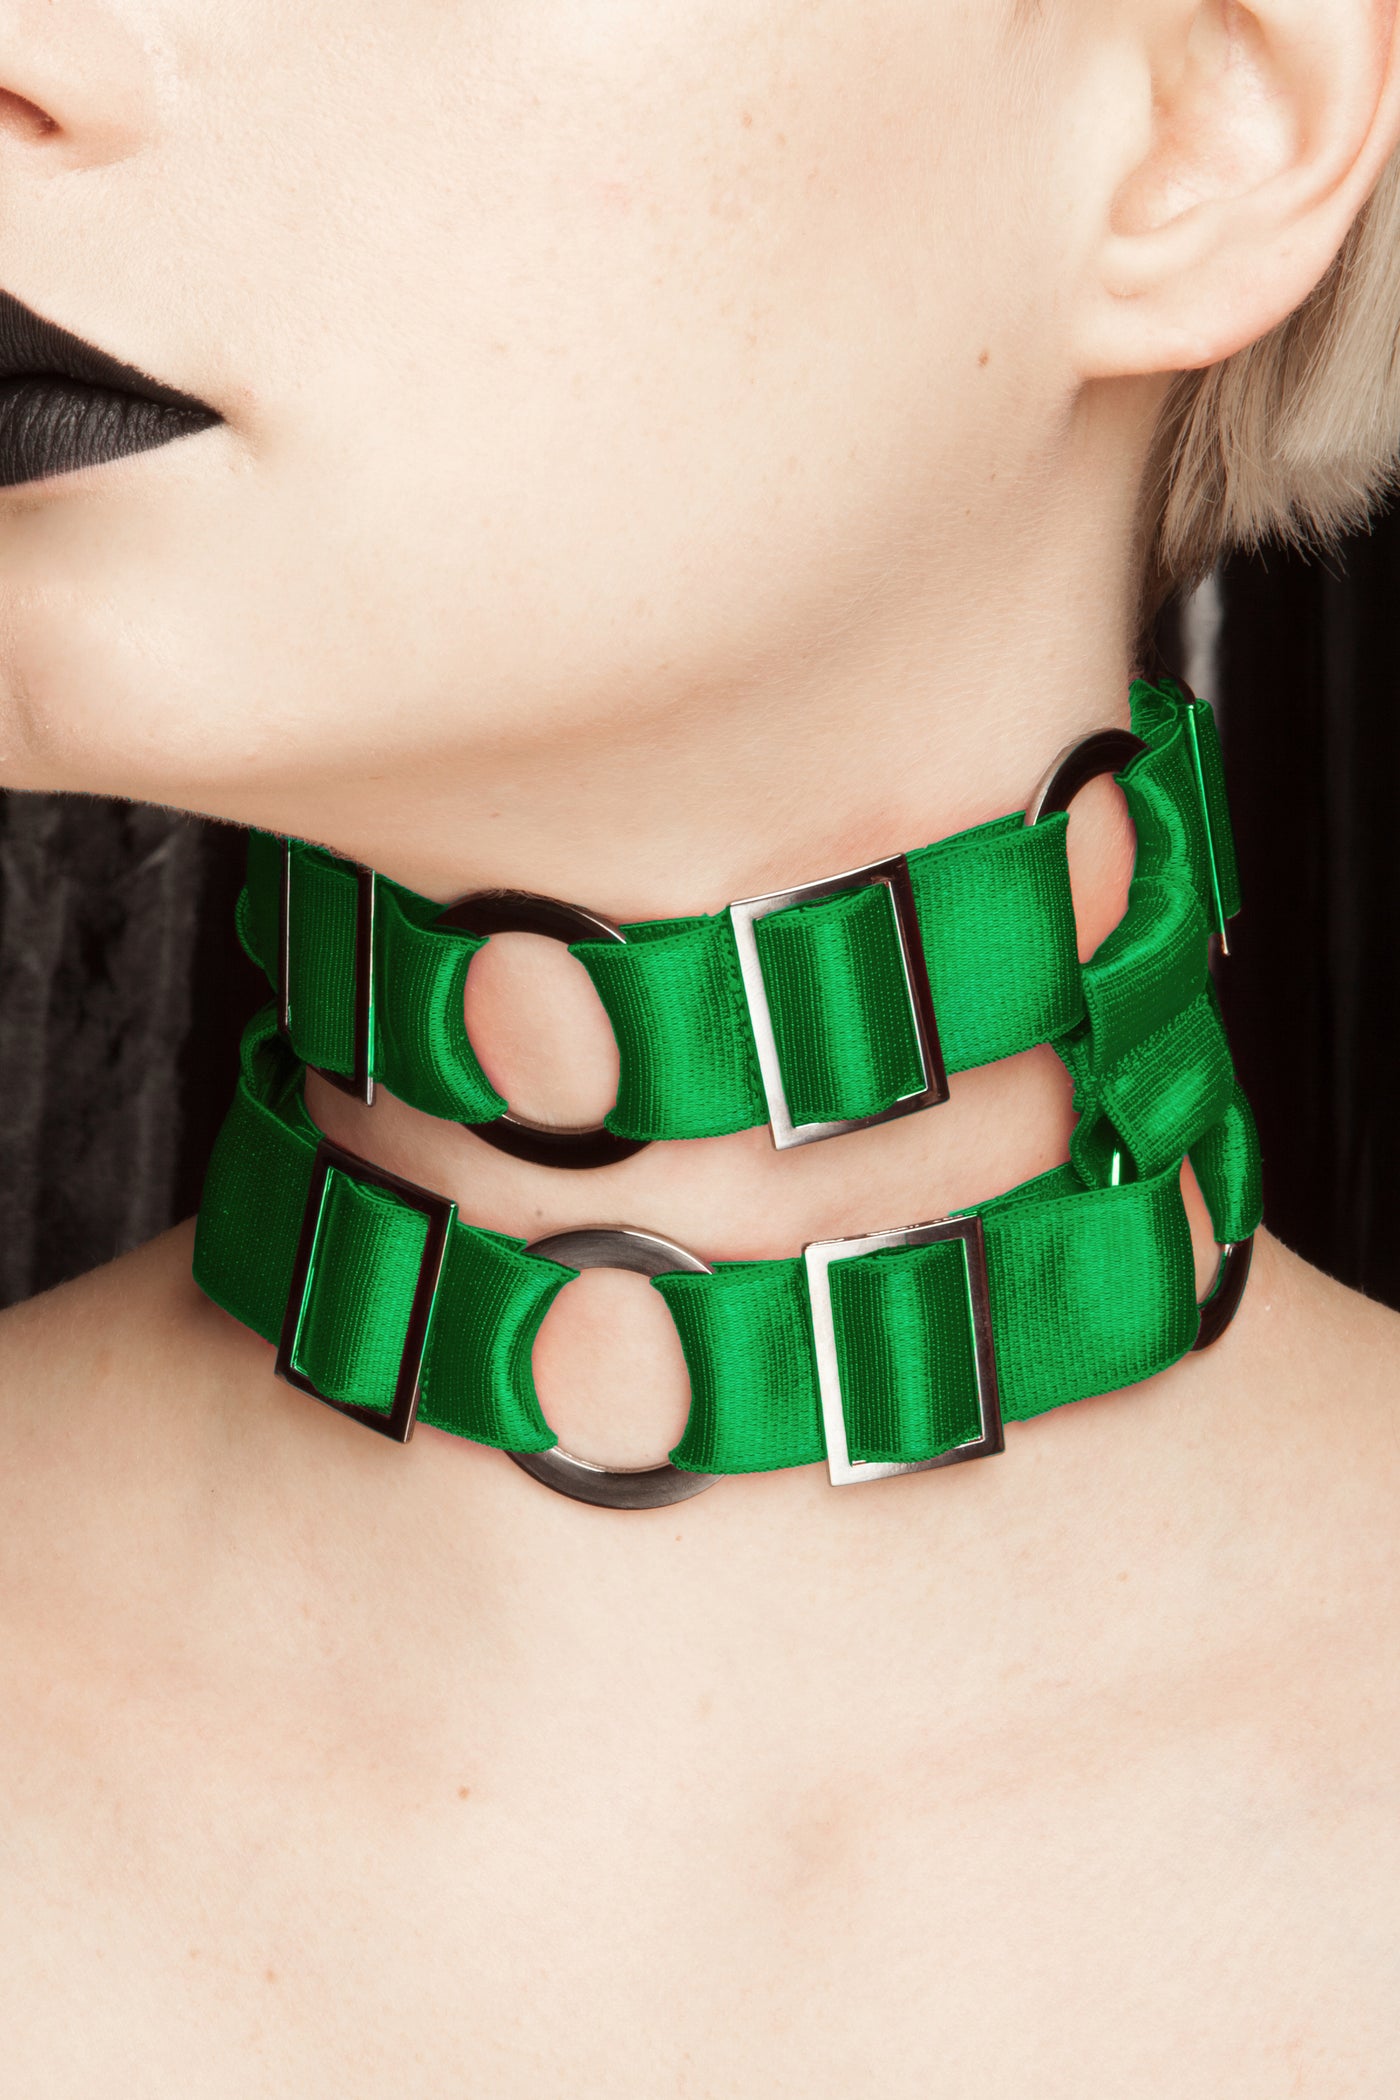 Viper Choker - With Crystal Options (Green)